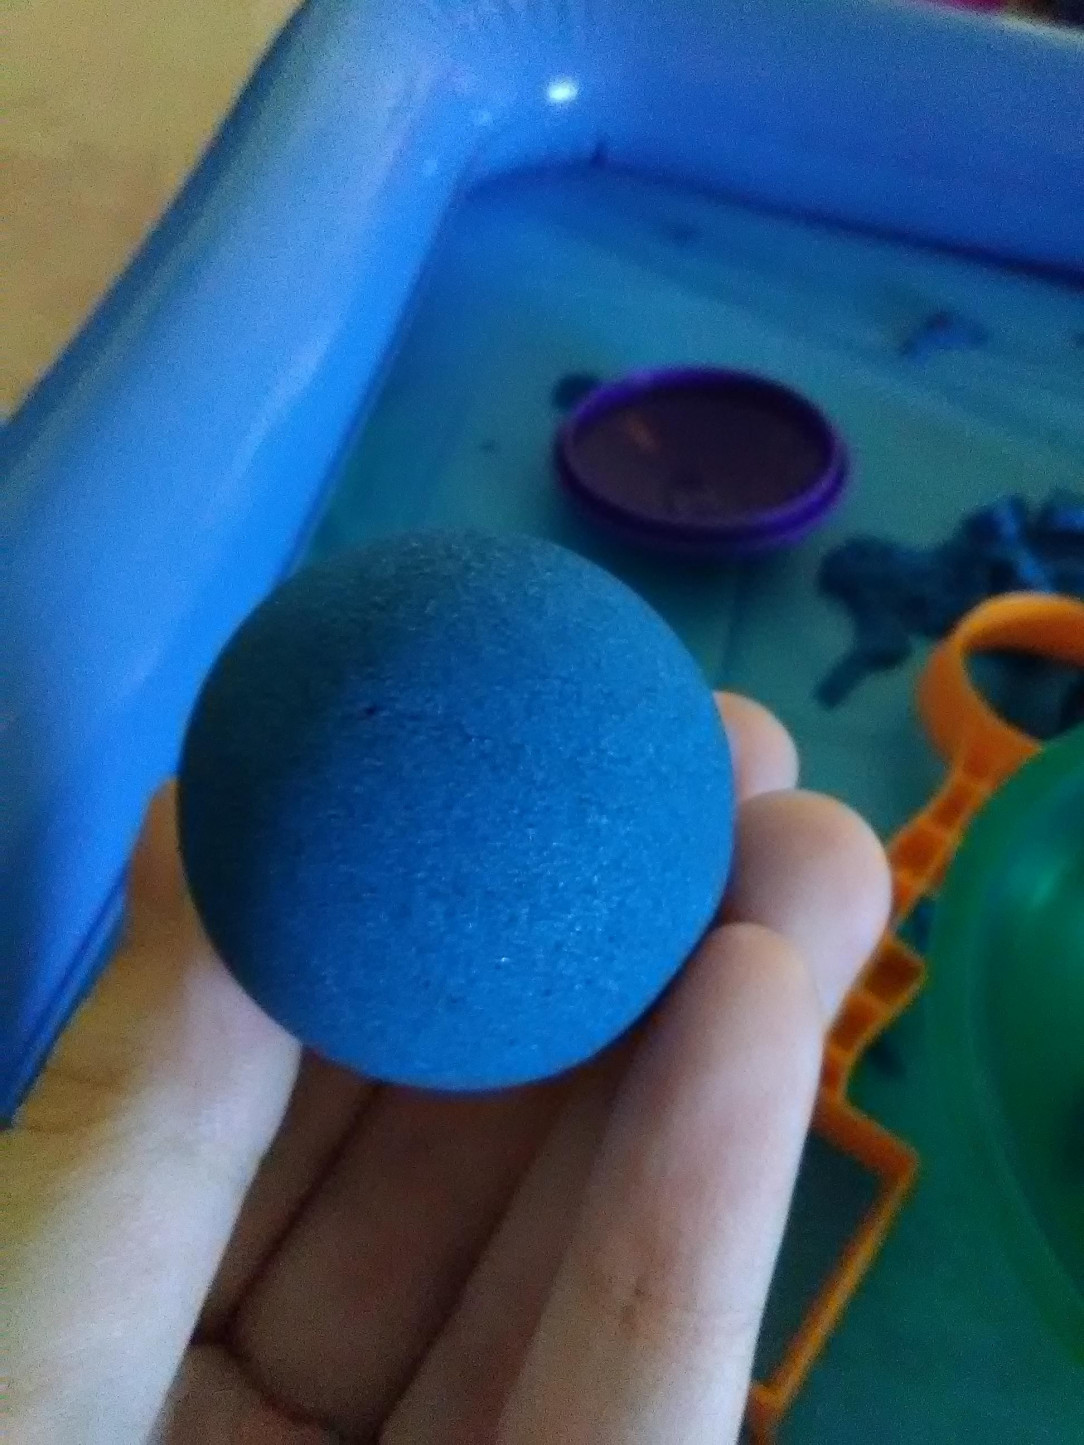 I made a perfect ball out of Kinetic Sand